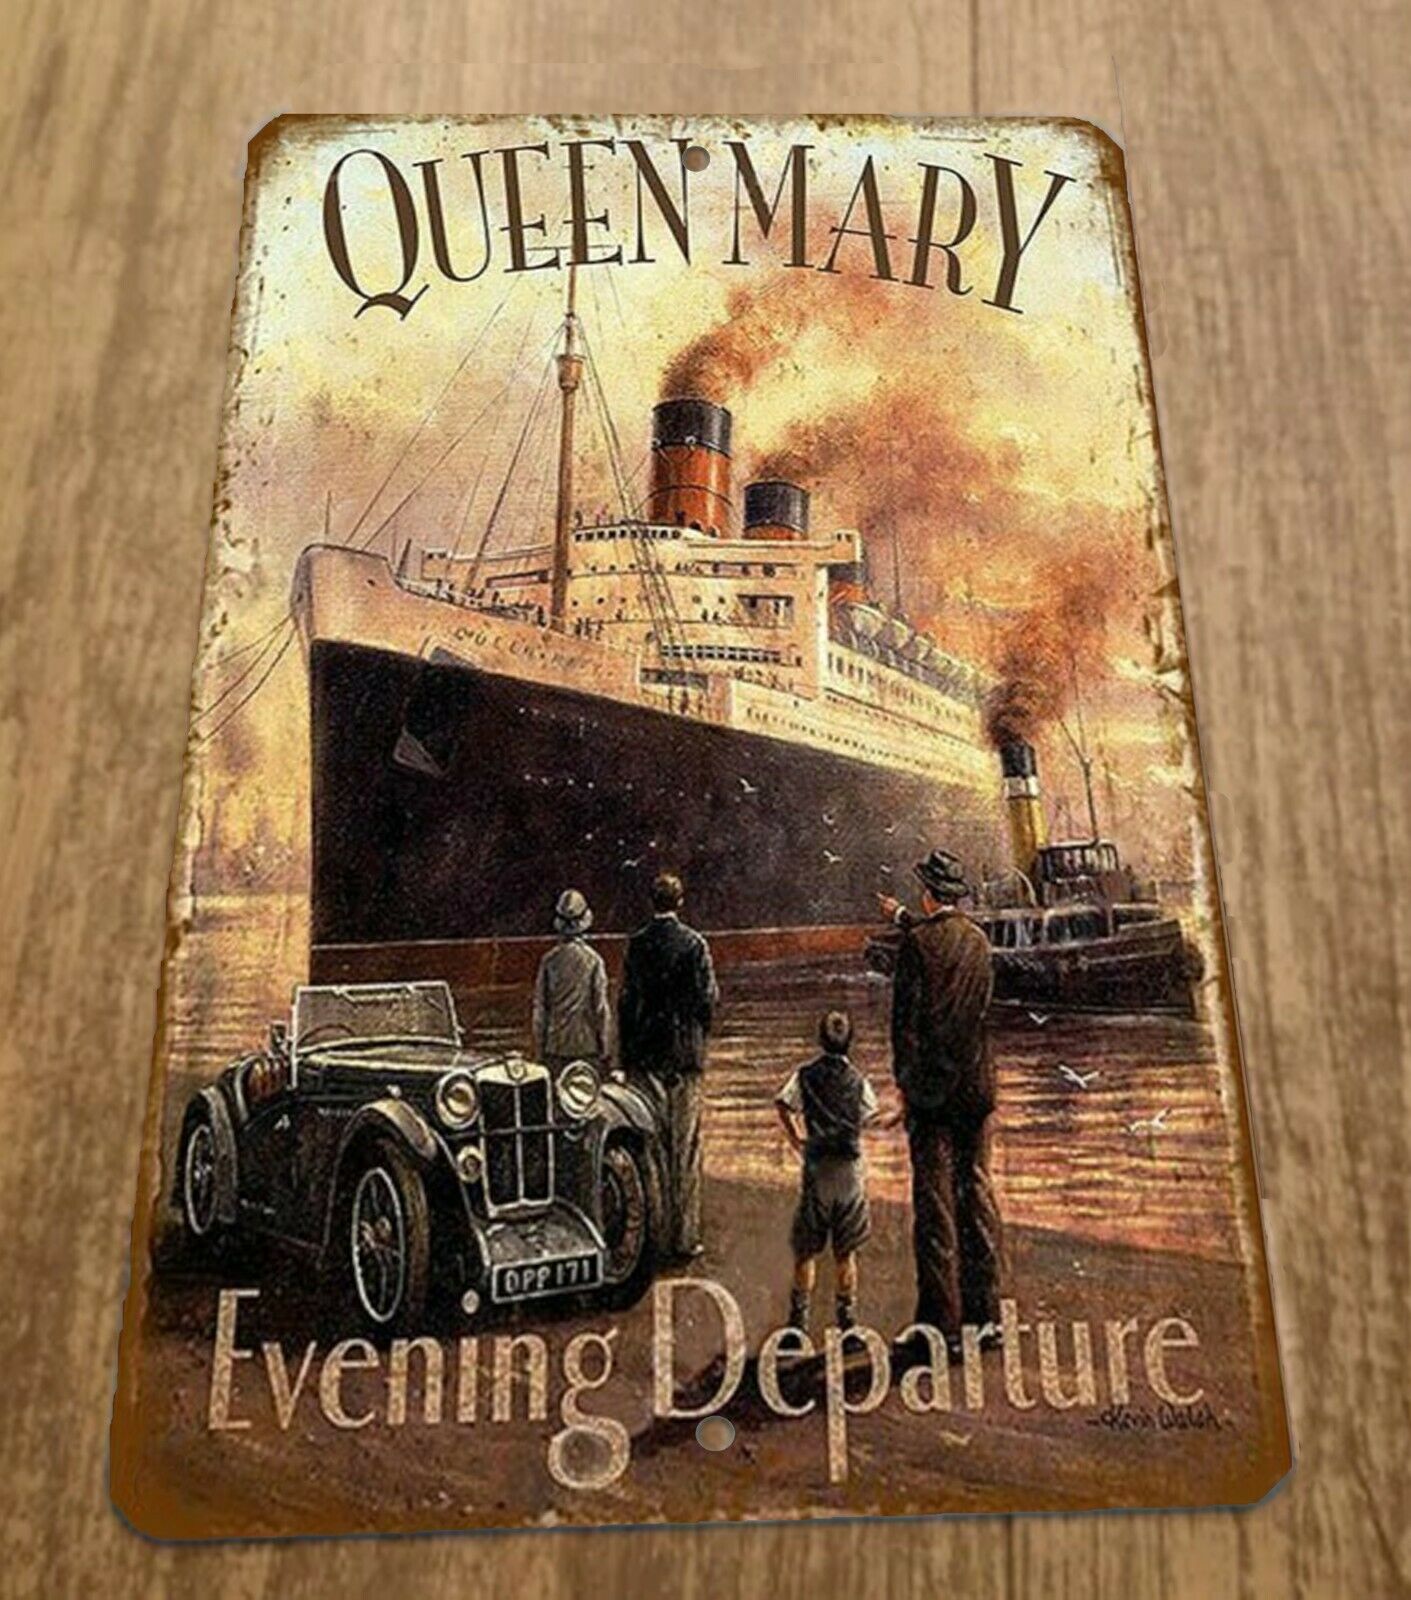 Queen Mary Evening Departure Vintage Look 8x12 Metal Wall Sign Misc Poster